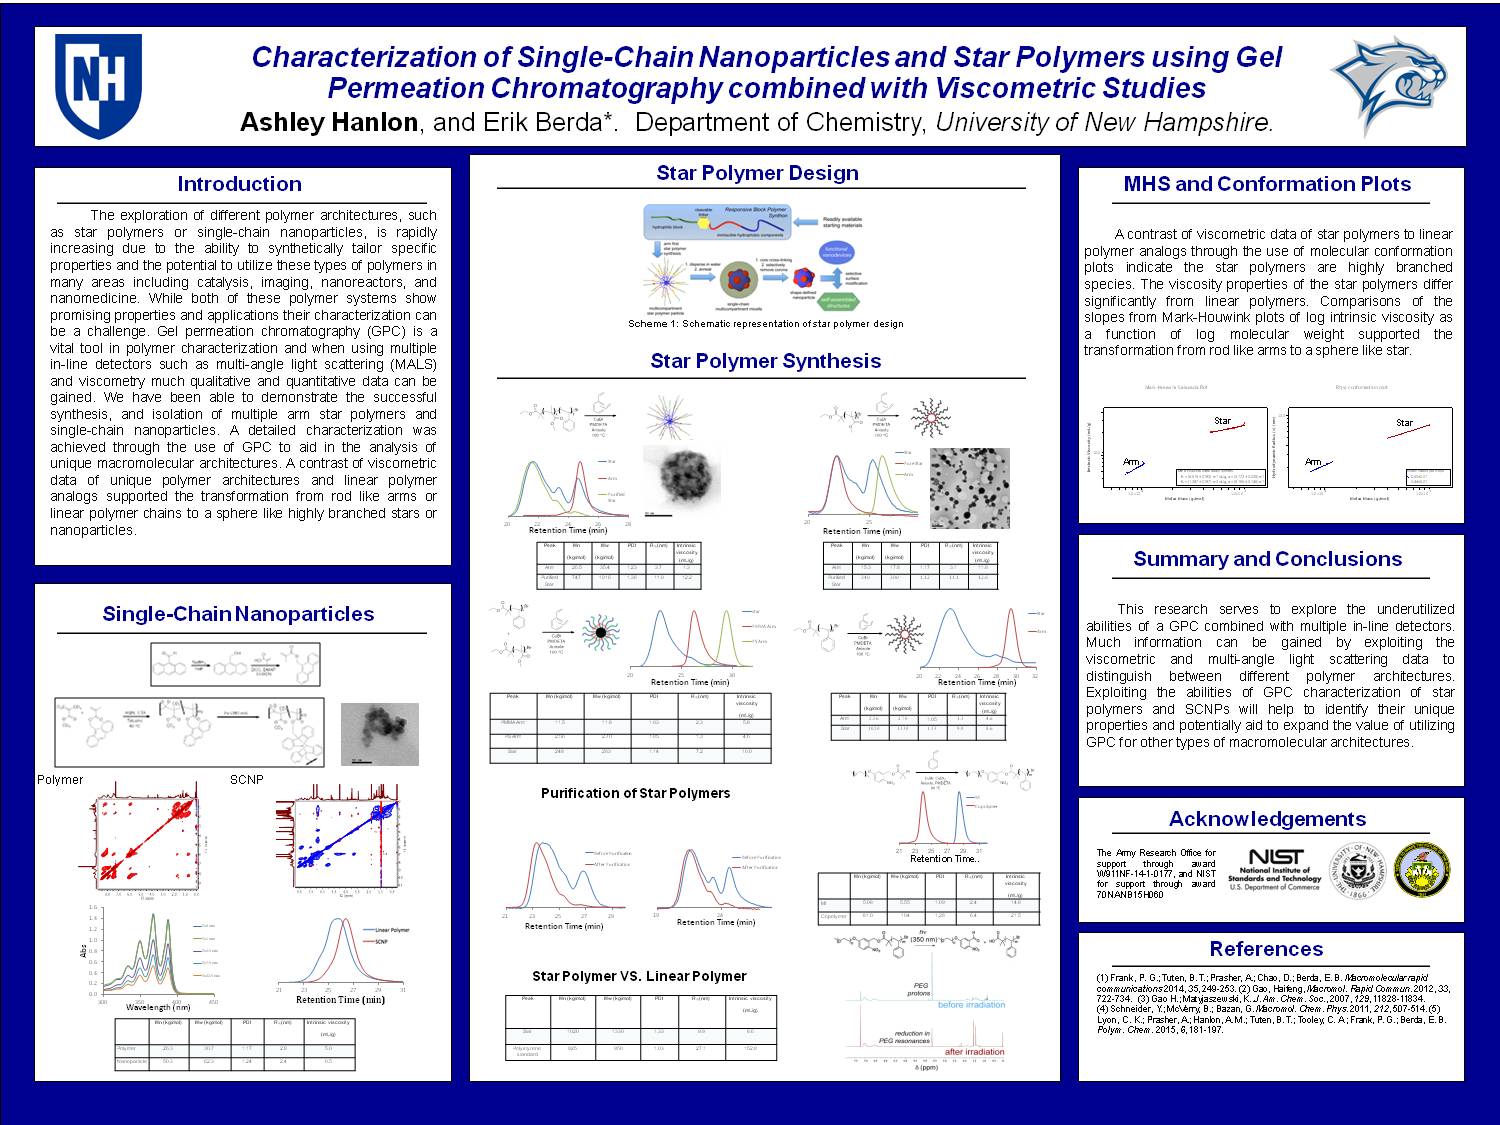 Characterization Of Single-Chain Nanoparticles And Star Polymers Using Gel Permeation Chromatography Combined With Viscometric Studies by amj63